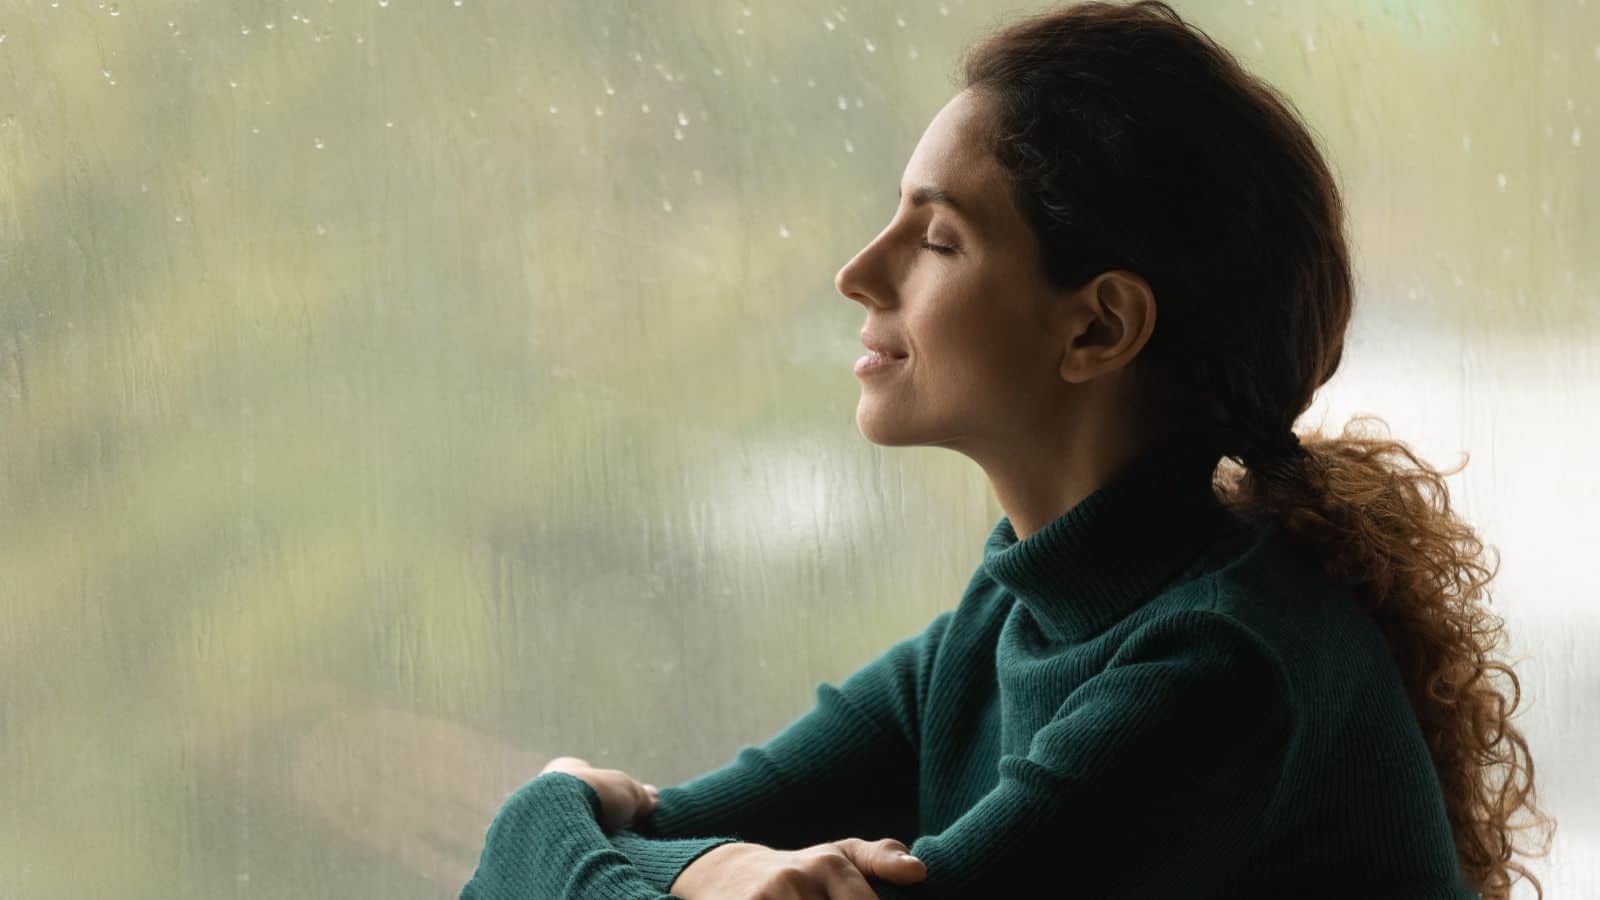 <p>Alone time is essential for good mental health. <a href="https://www.verywellmind.com/how-important-is-alone-time-for-mental-health-5184607">Verywell Mind</a> recommends taking some solitary time to free yourself from social pressures and tap into your own thoughts and feelings. People with no siblings are more comfortable alone because they grew up spending time by themselves, which has excellent emotional benefits.</p>